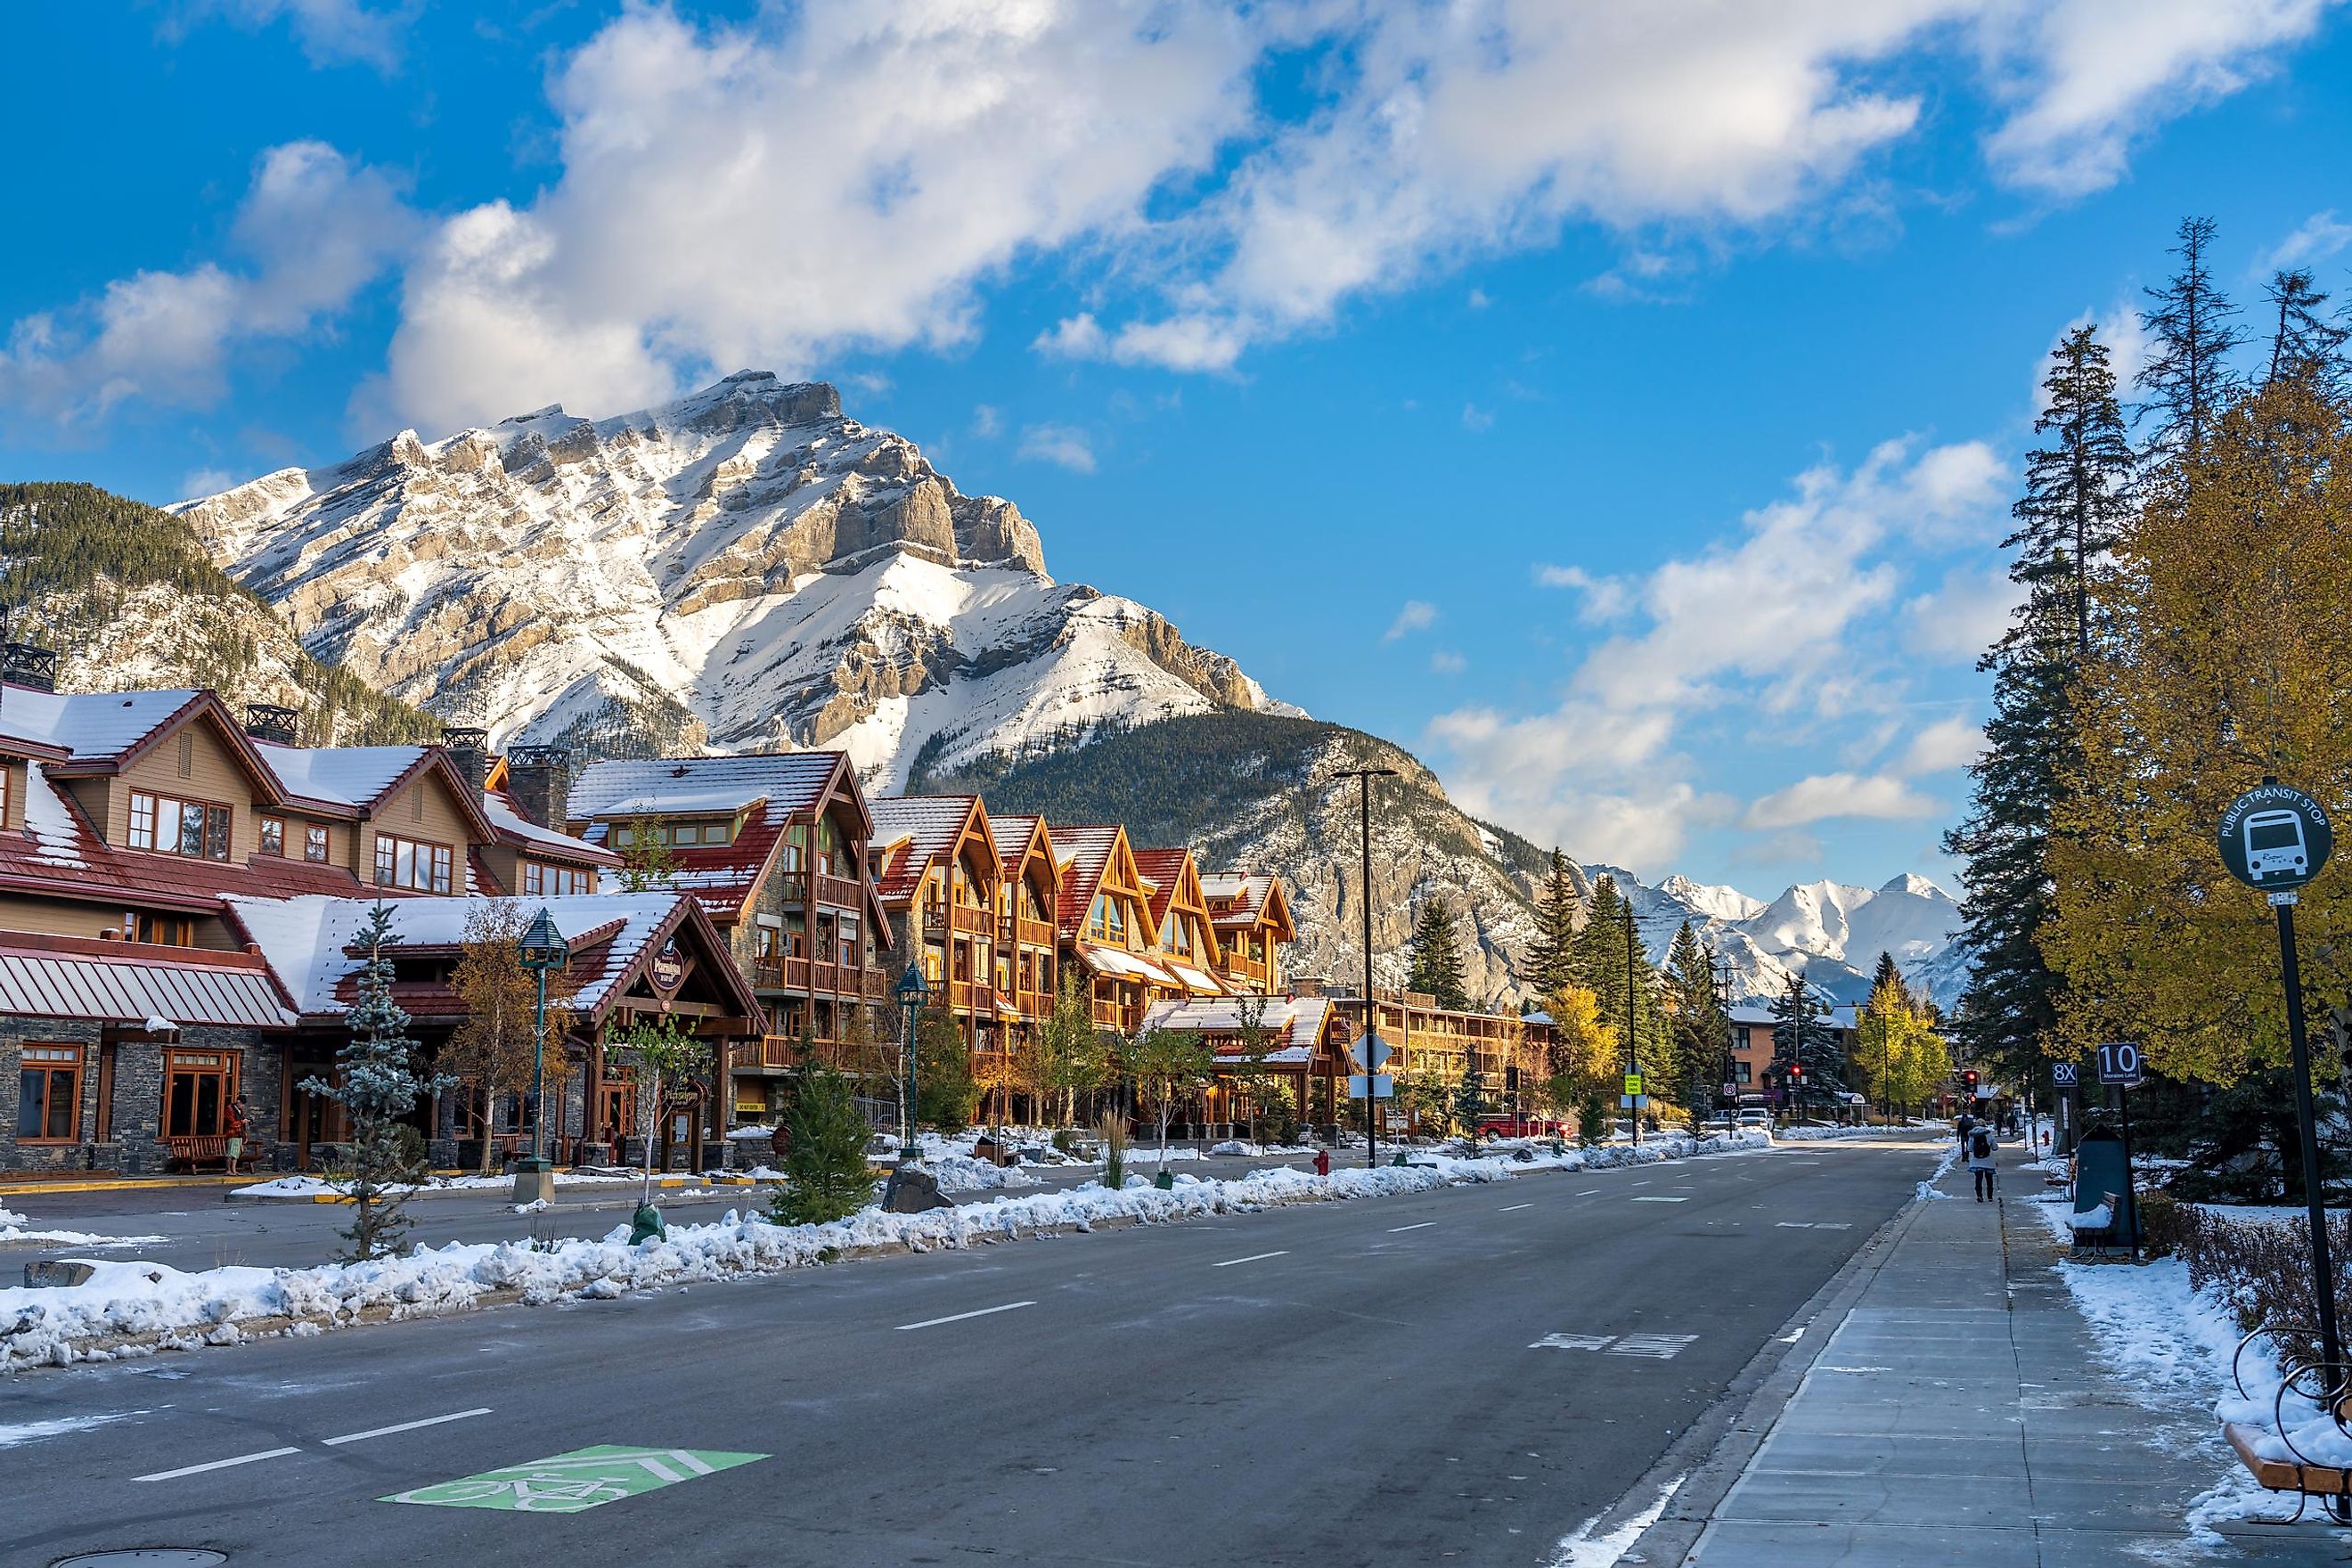 The spectacular Town of Banff in Alberta.